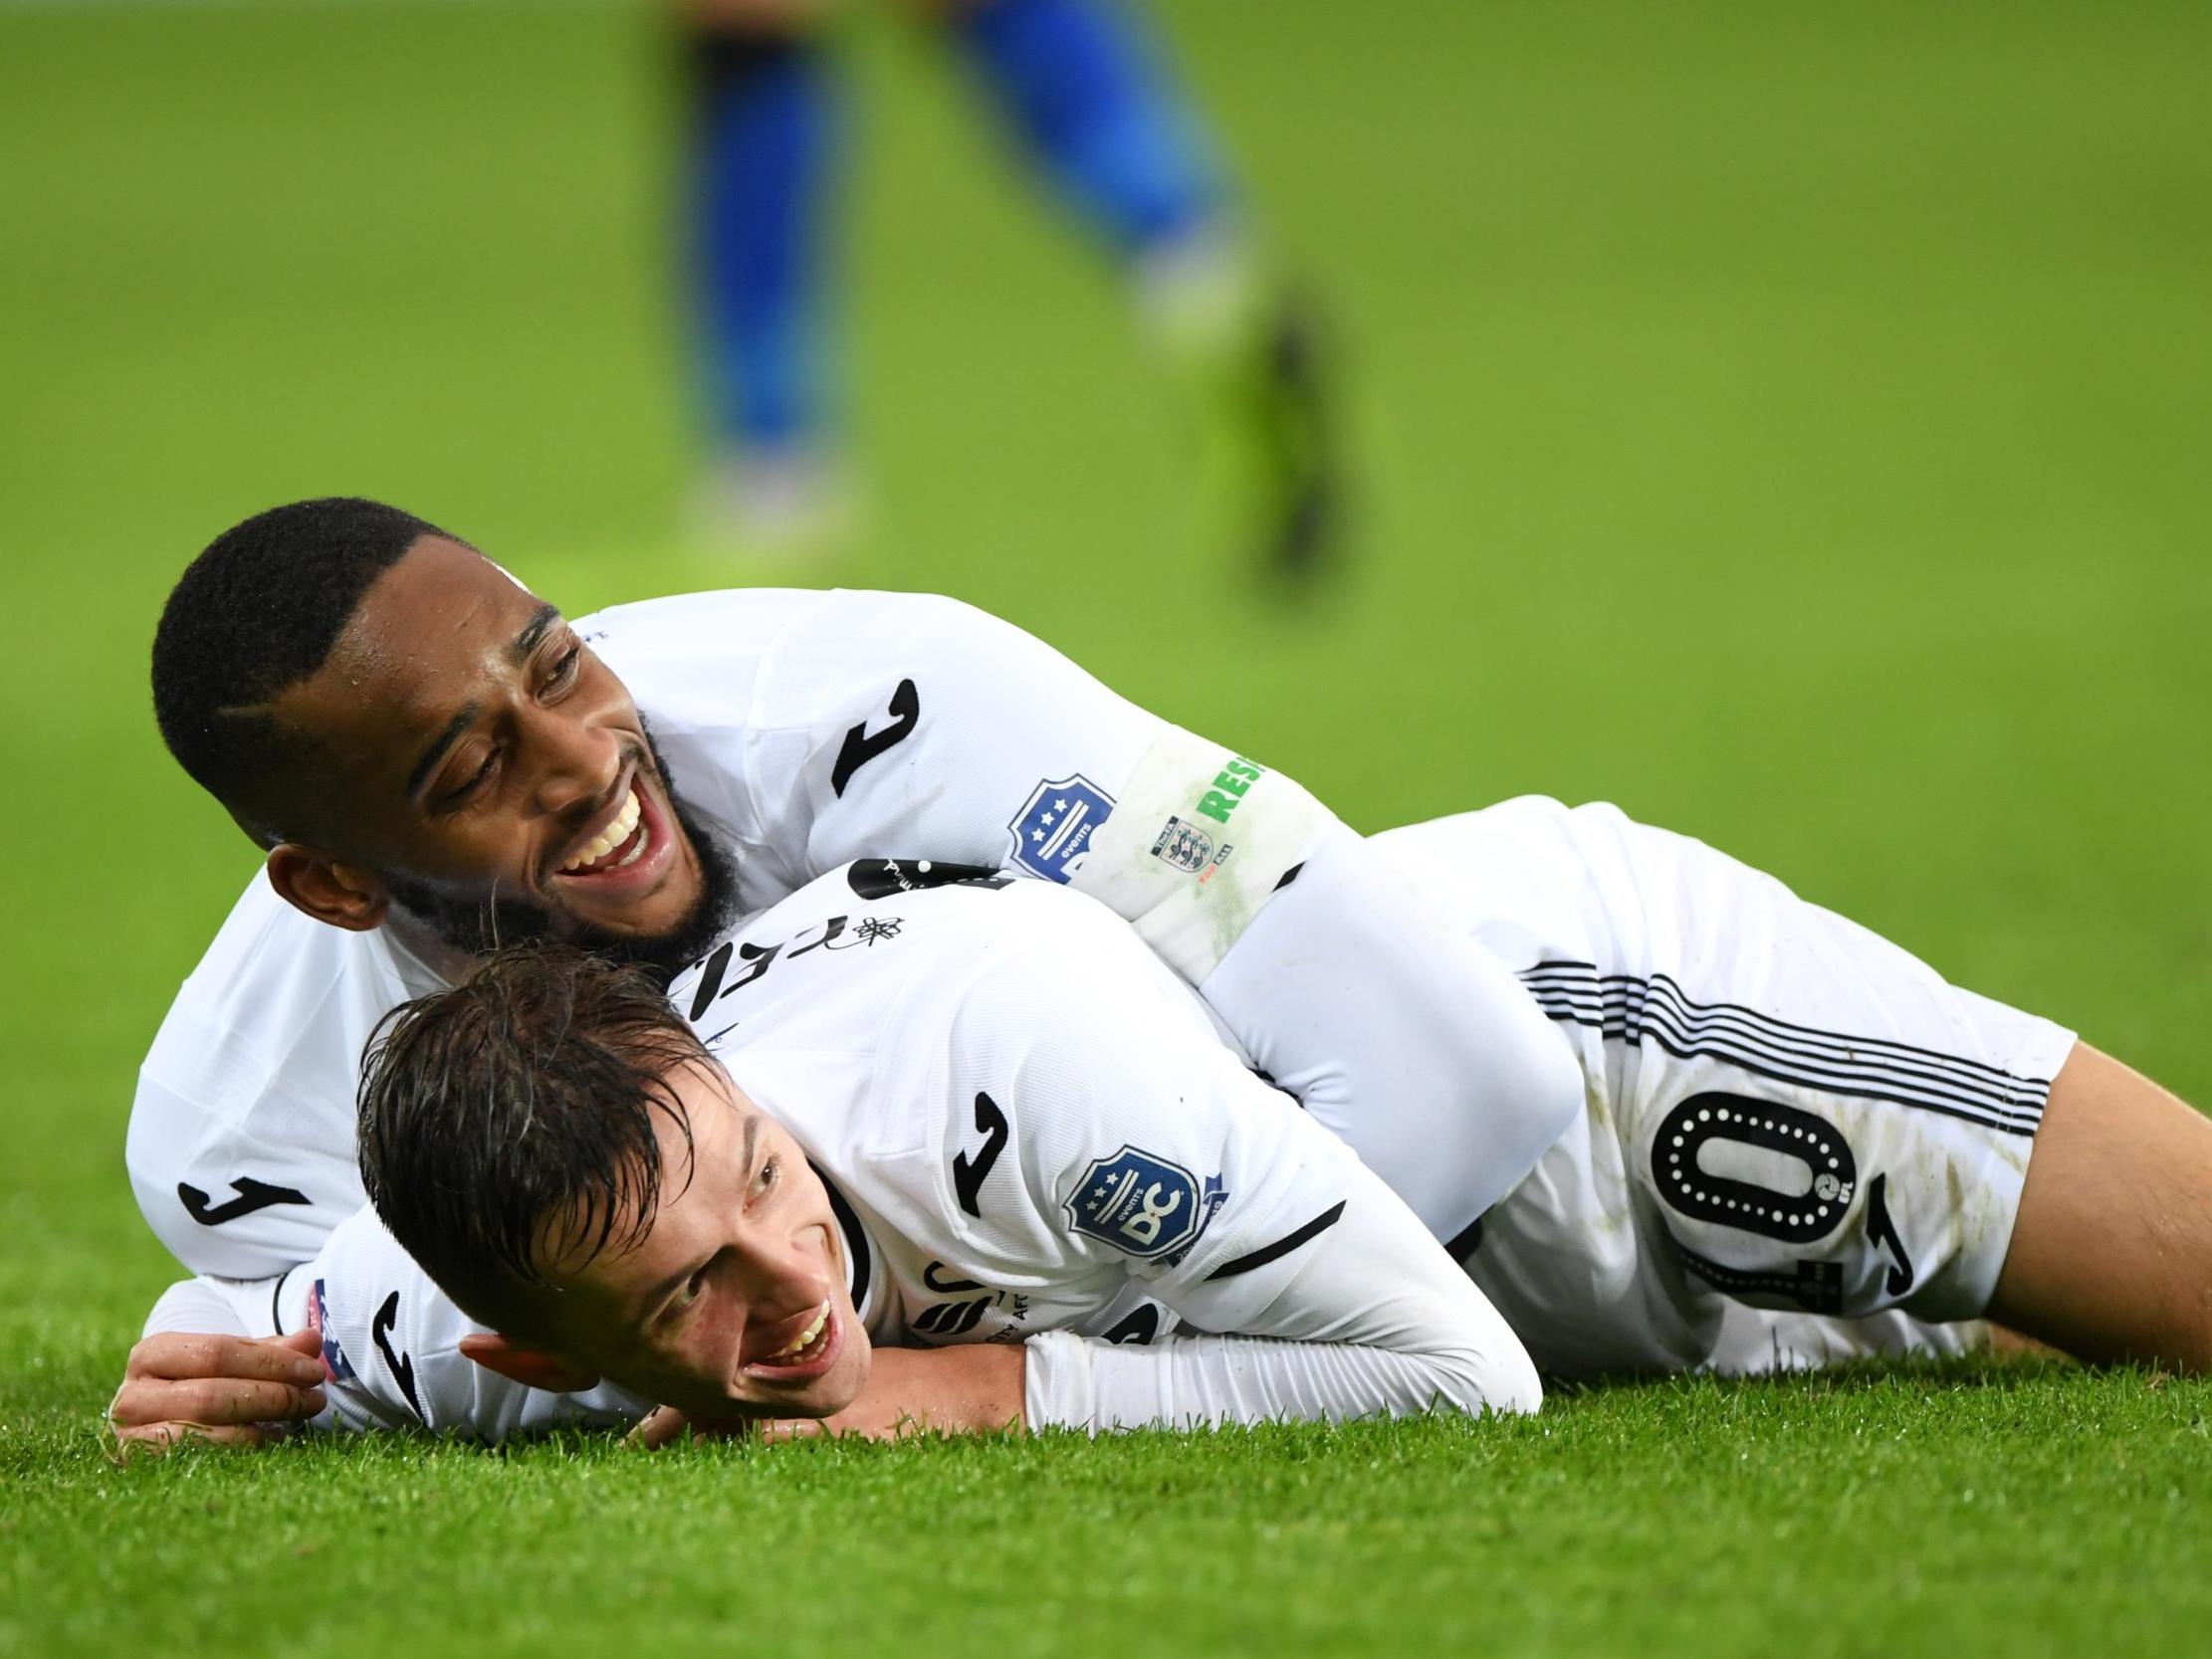 Swansea brushed past Gillingham with a 4-1 win